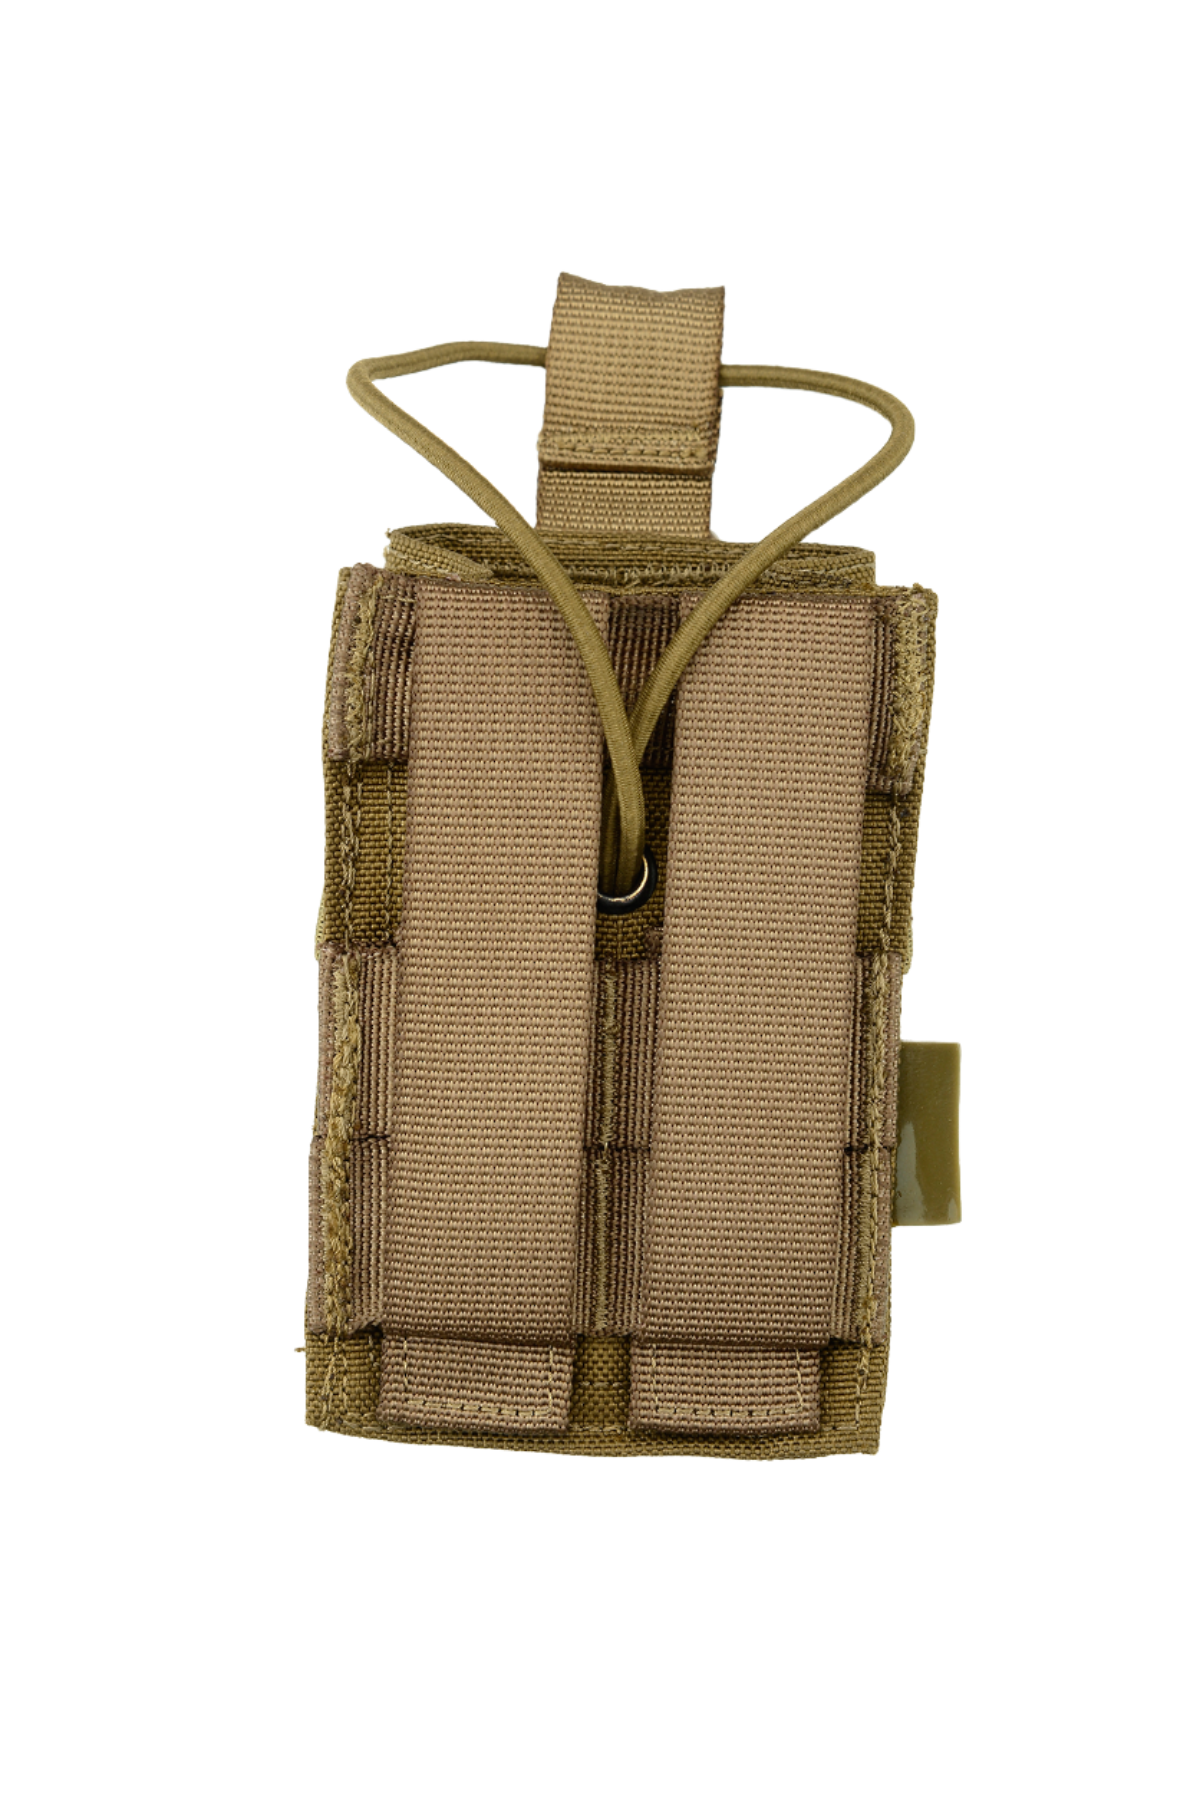 SHE-21090 "ARP" ADJUSTABLE RADIO POUCH COYOTE